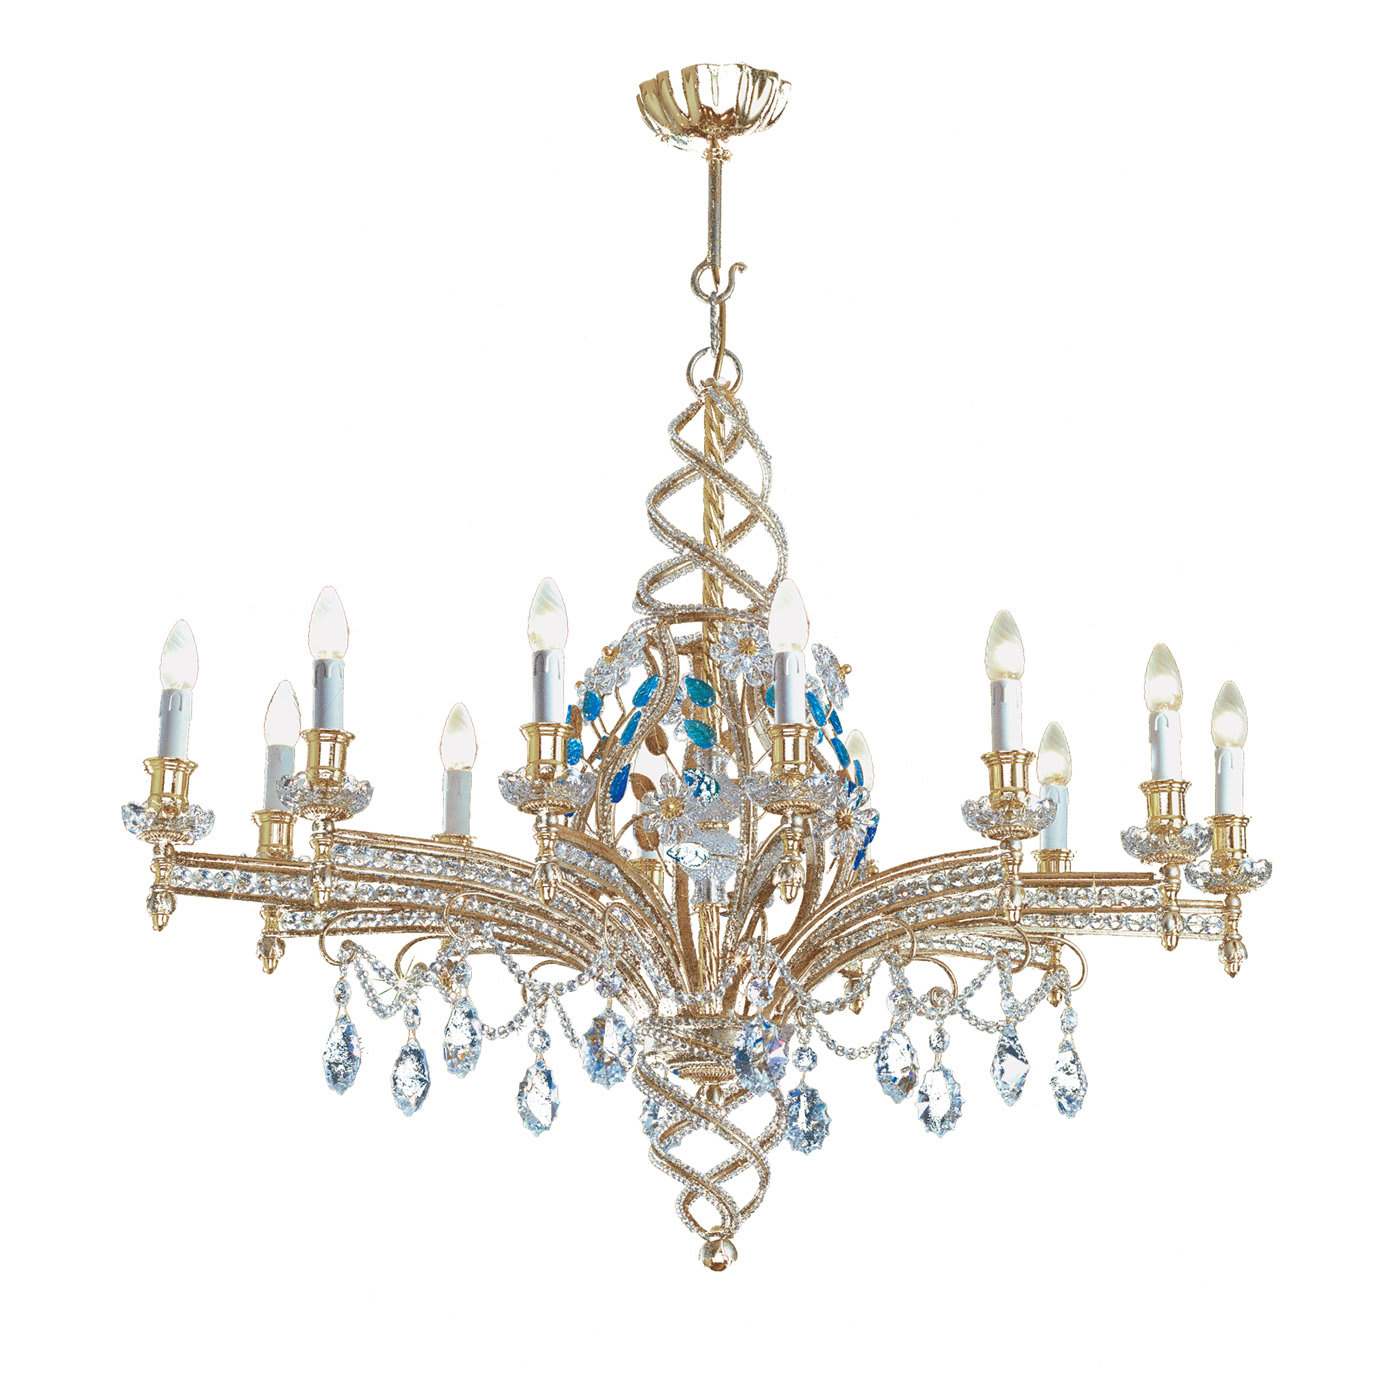 12-Light Iron Chandelier with Straight Arms - Banci